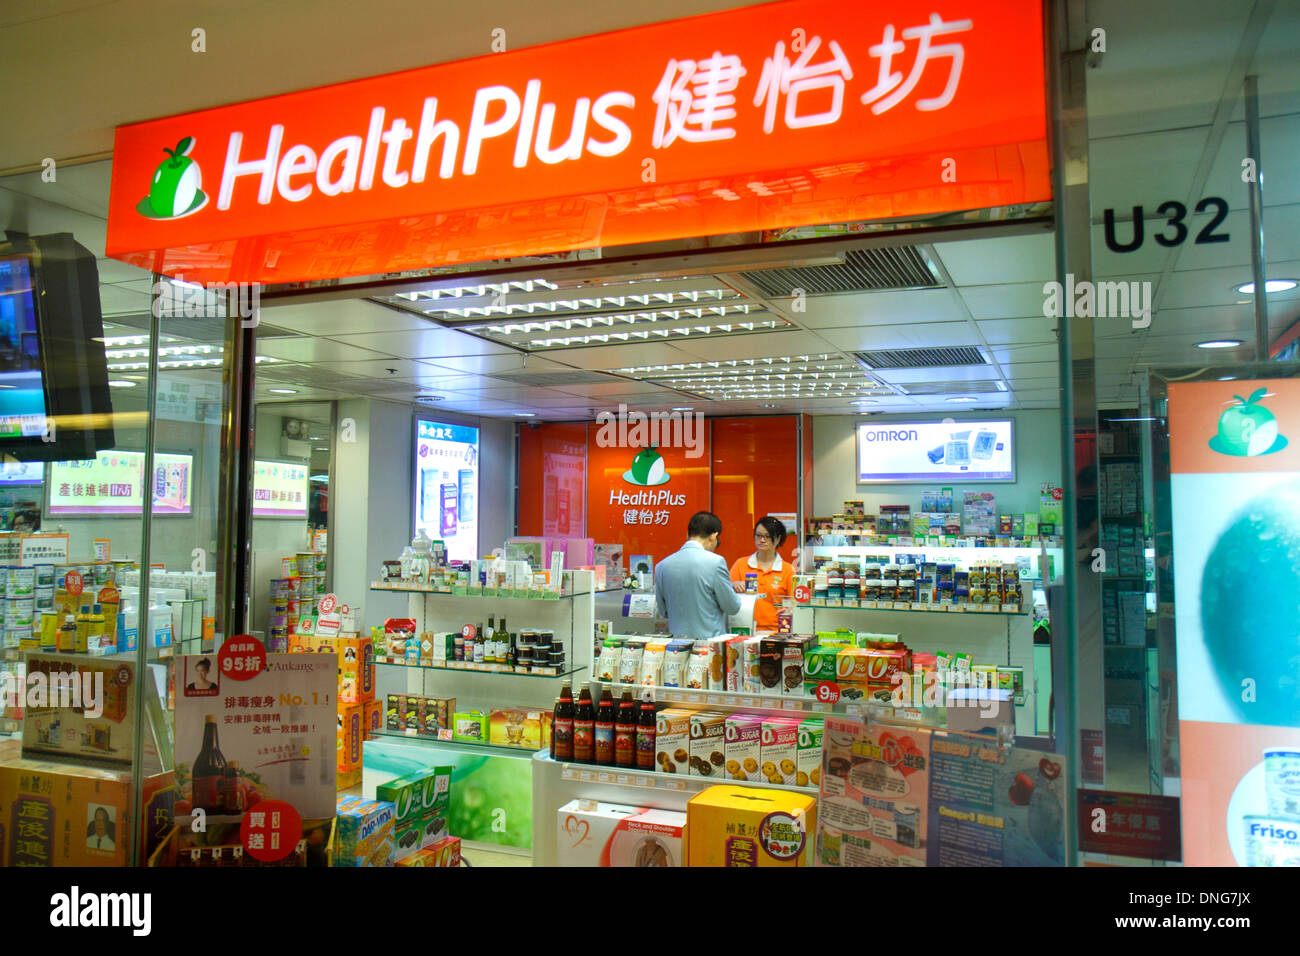 Hong Kong China,HK,Asia,Chinese,Oriental,Island,North Point,King's Road,Health Plus,dietary,store,display sale front,entrance,supplements,herbal medic Stock Photo